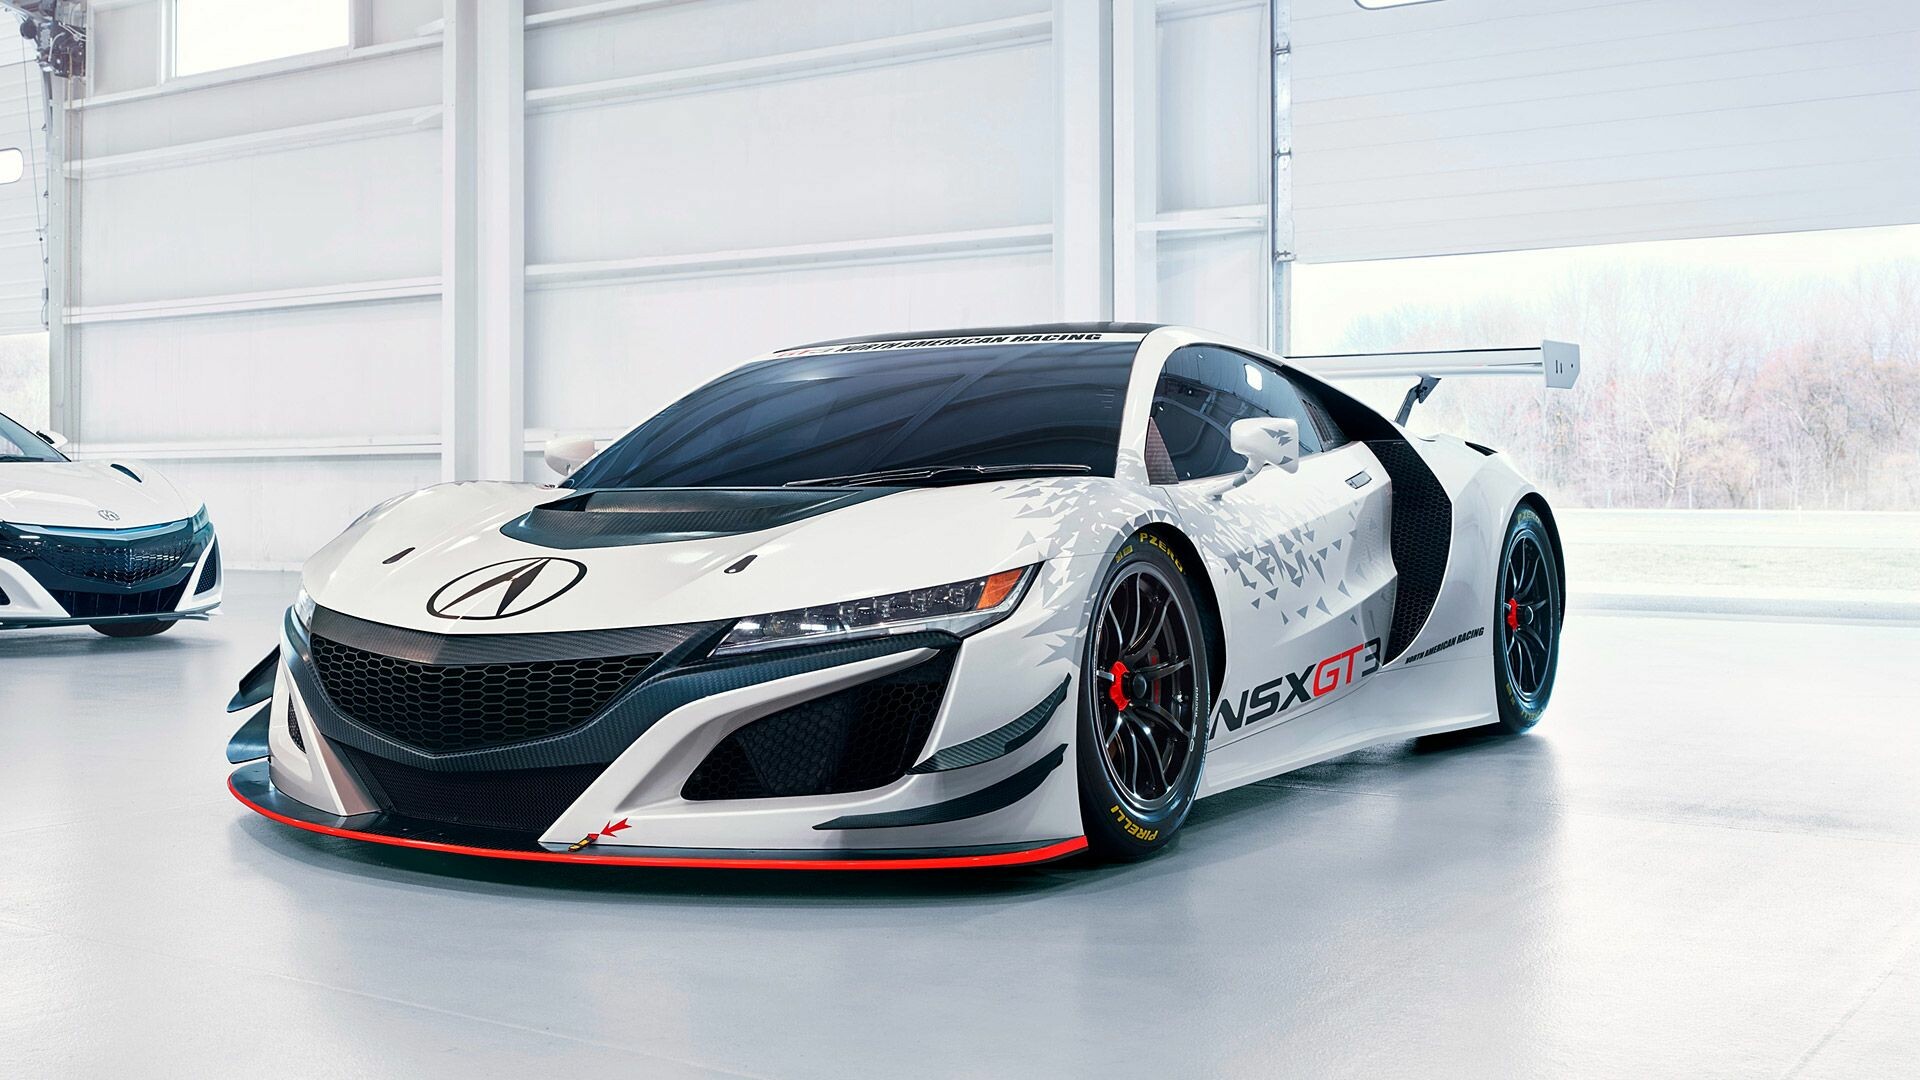 Acura: NSX GT3 V3, Track variant of the supercar, Unveiled at the 2016 New York International Auto Show. 1920x1080 Full HD Background.